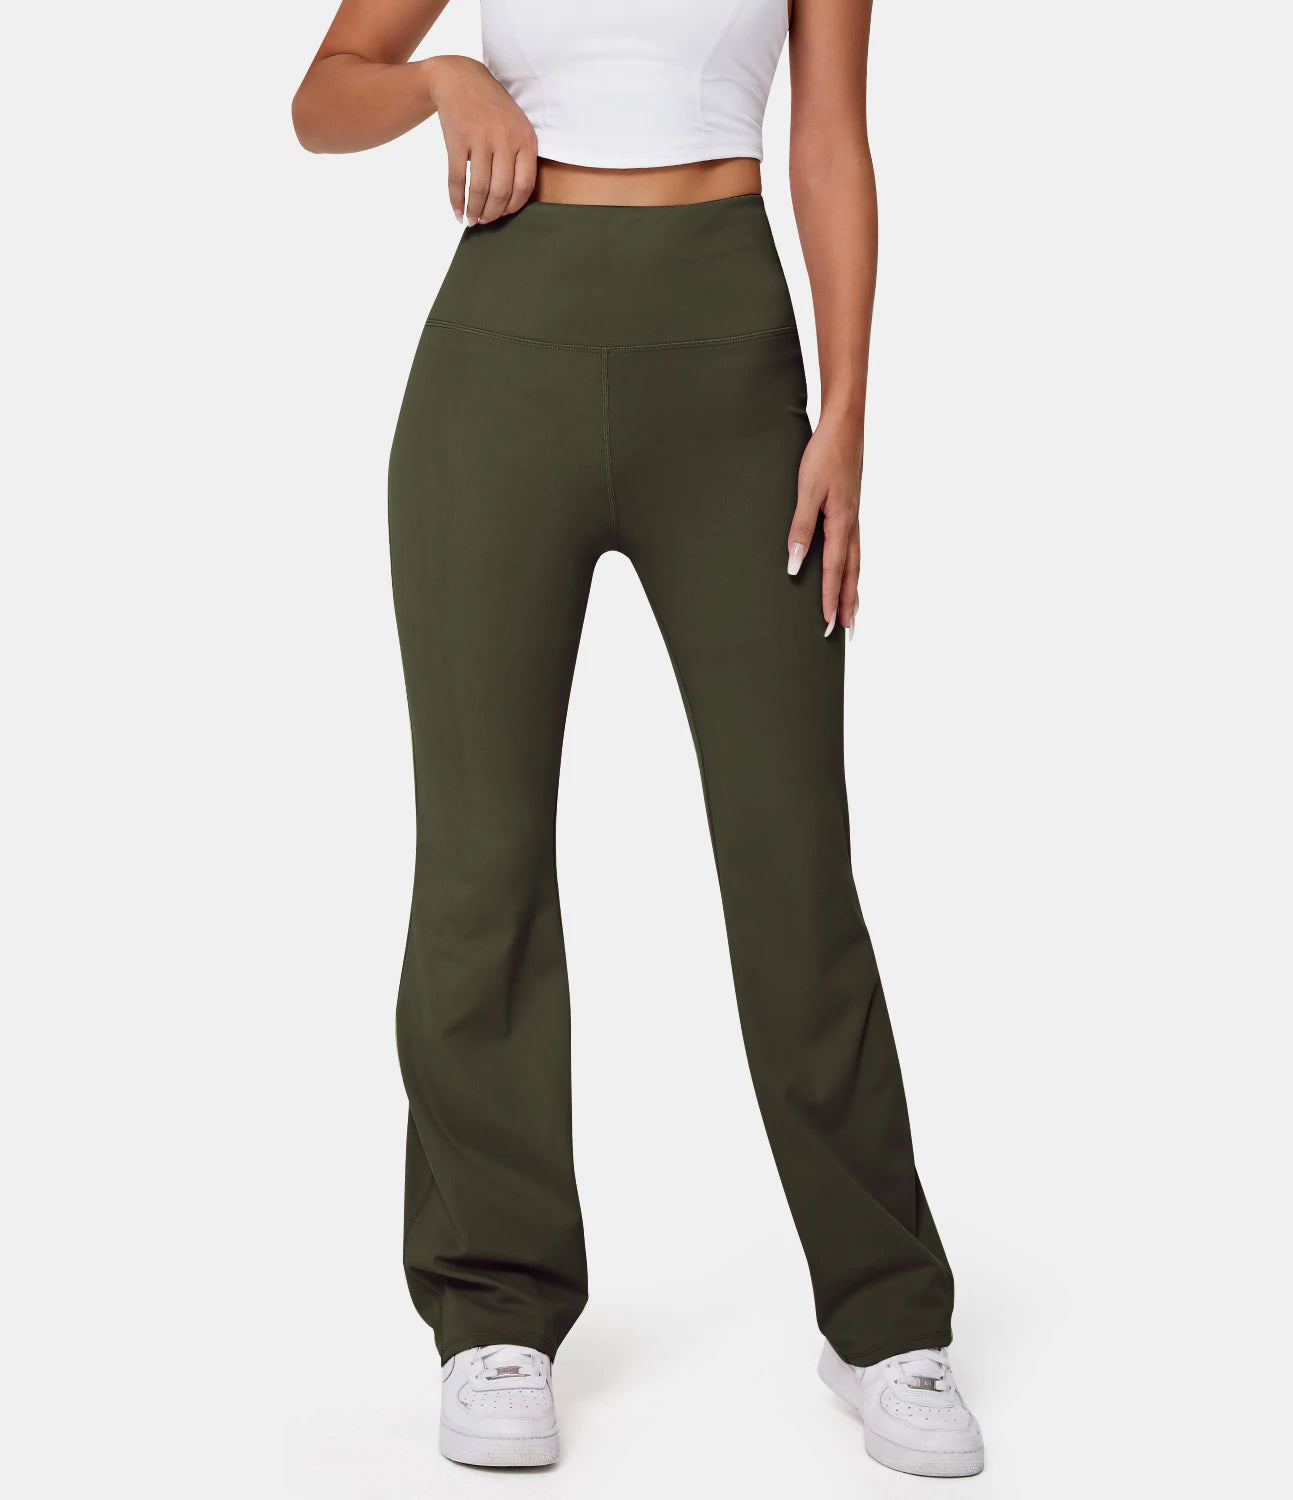 High Waist Scrunch Butt Yoga Leggings With Pockets With Back Pocket Womens  Fitness Sport Legging For Gym, Running, And Workouts Push Up Femme Tight  Style X0831 From Vip_official_001, $5.78 | DHgate.Com